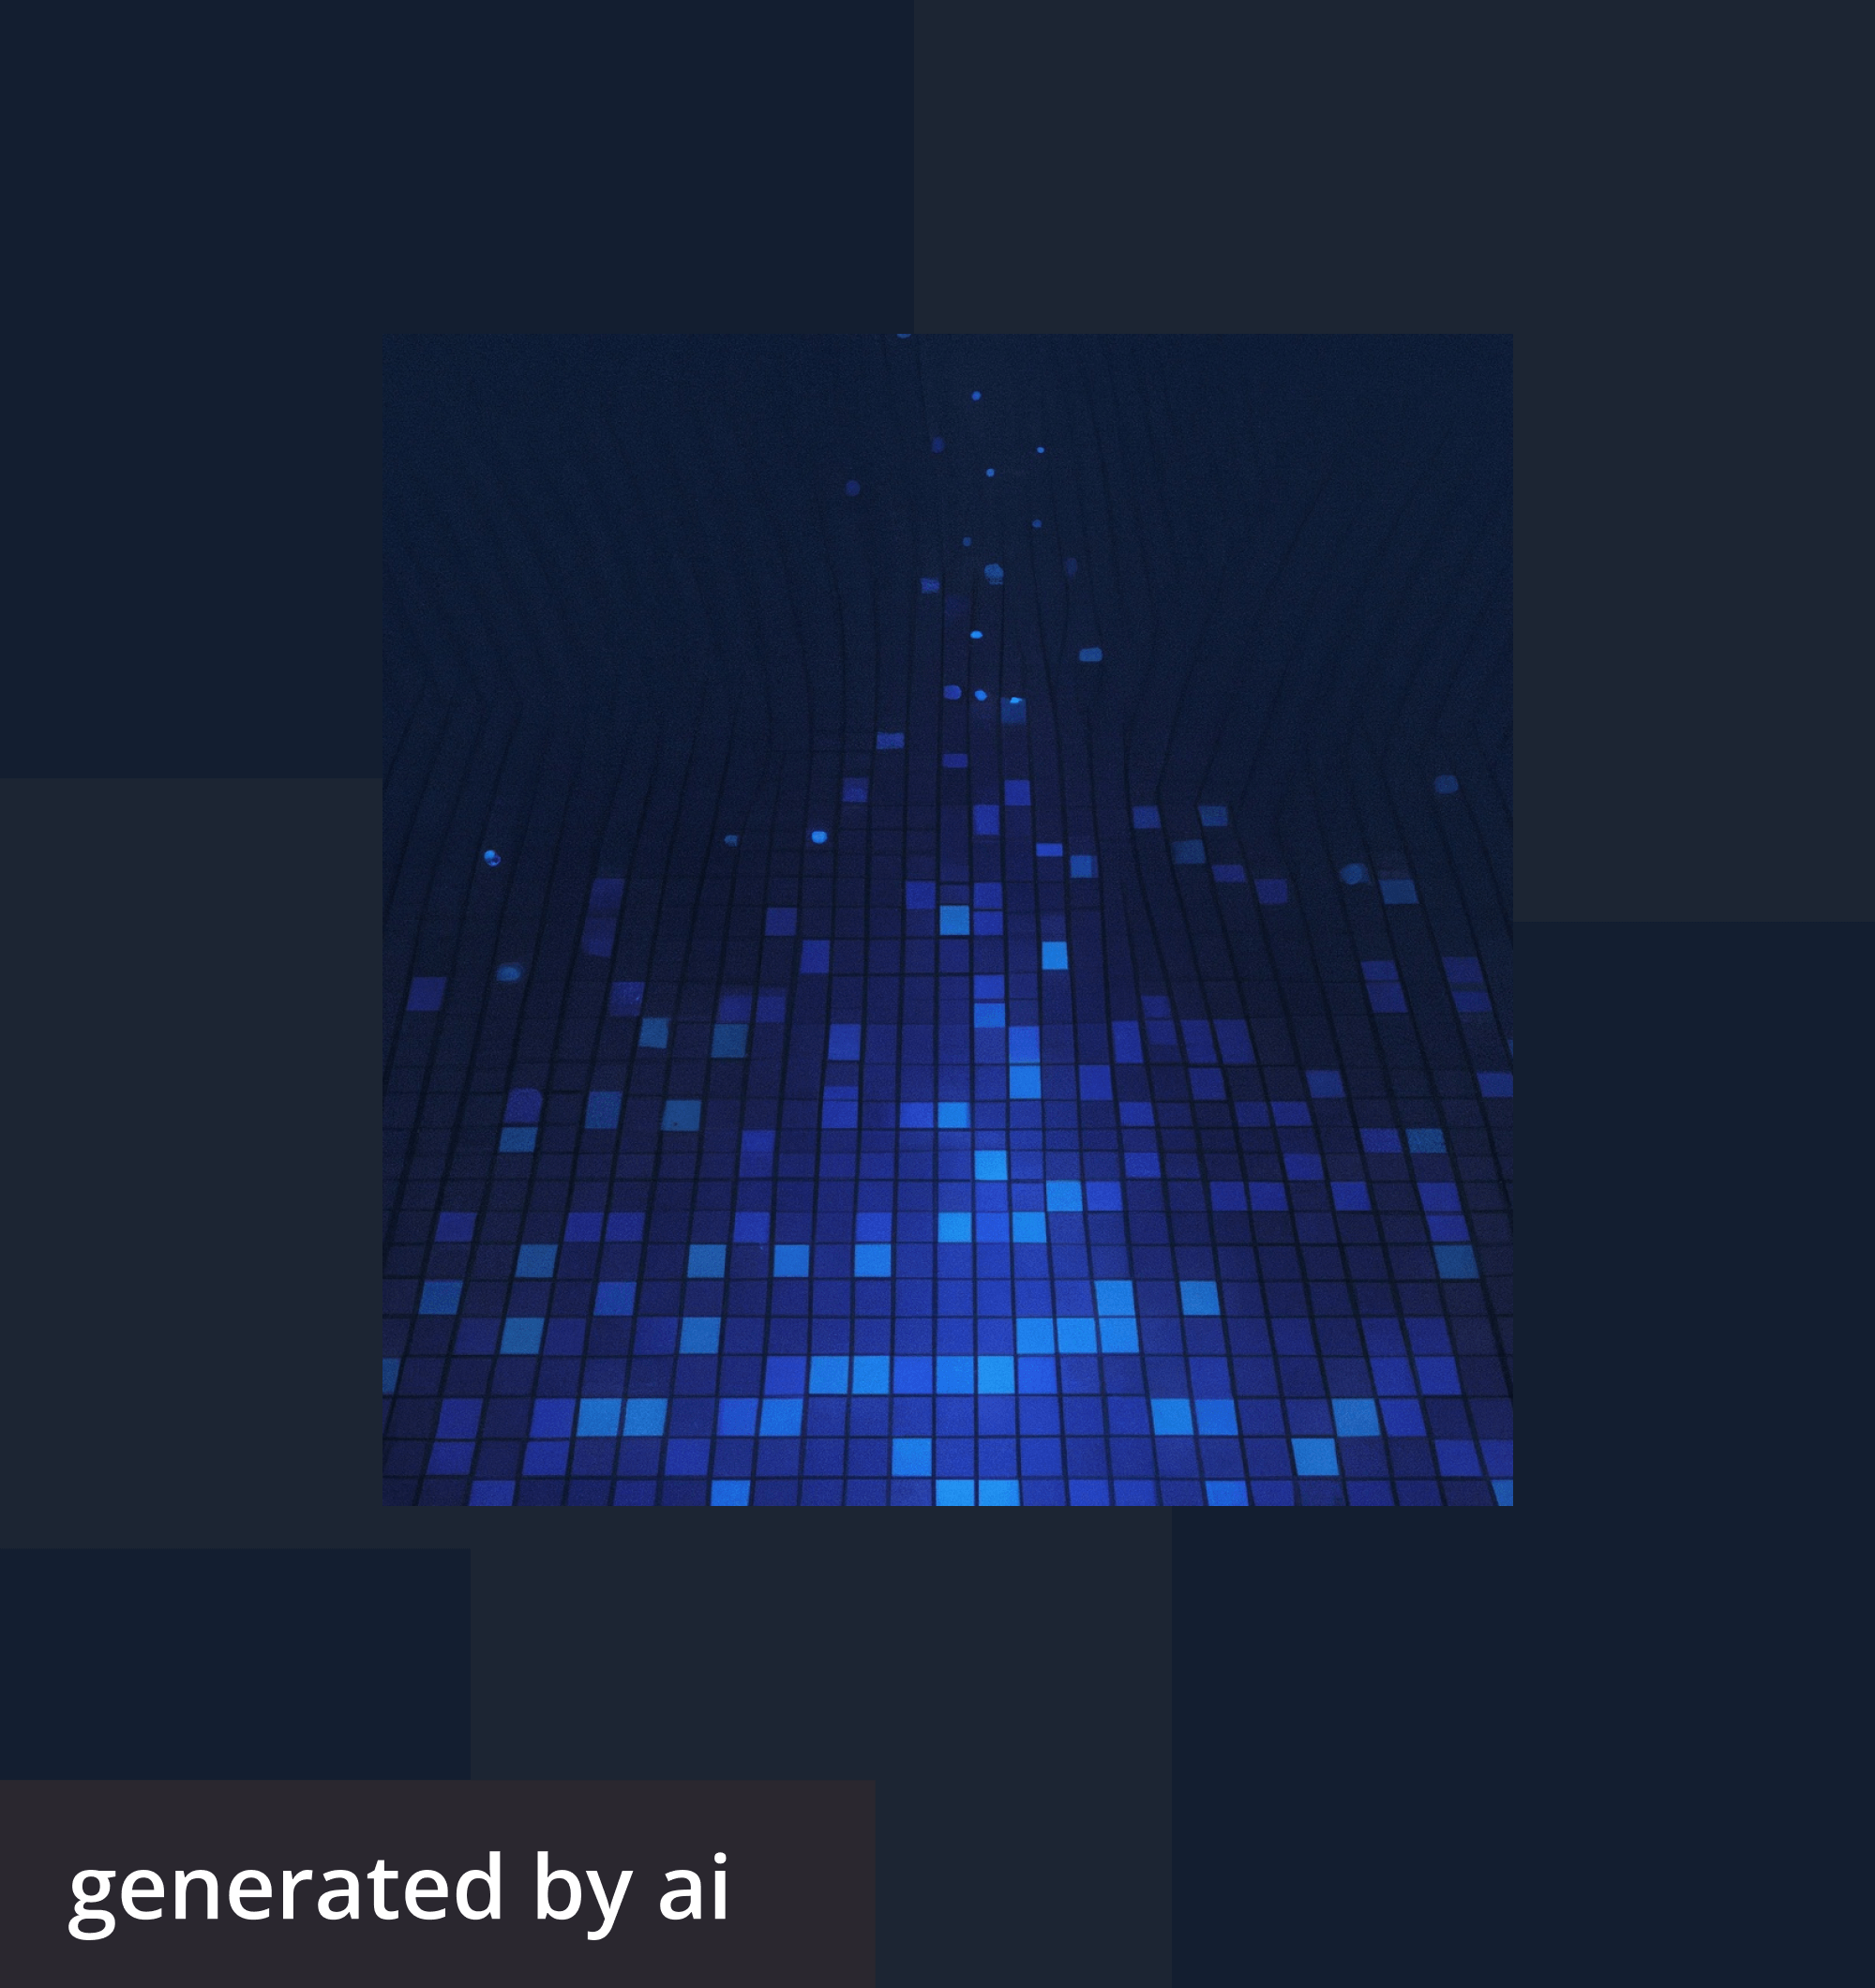 Abstract, futuristic image generated by AI